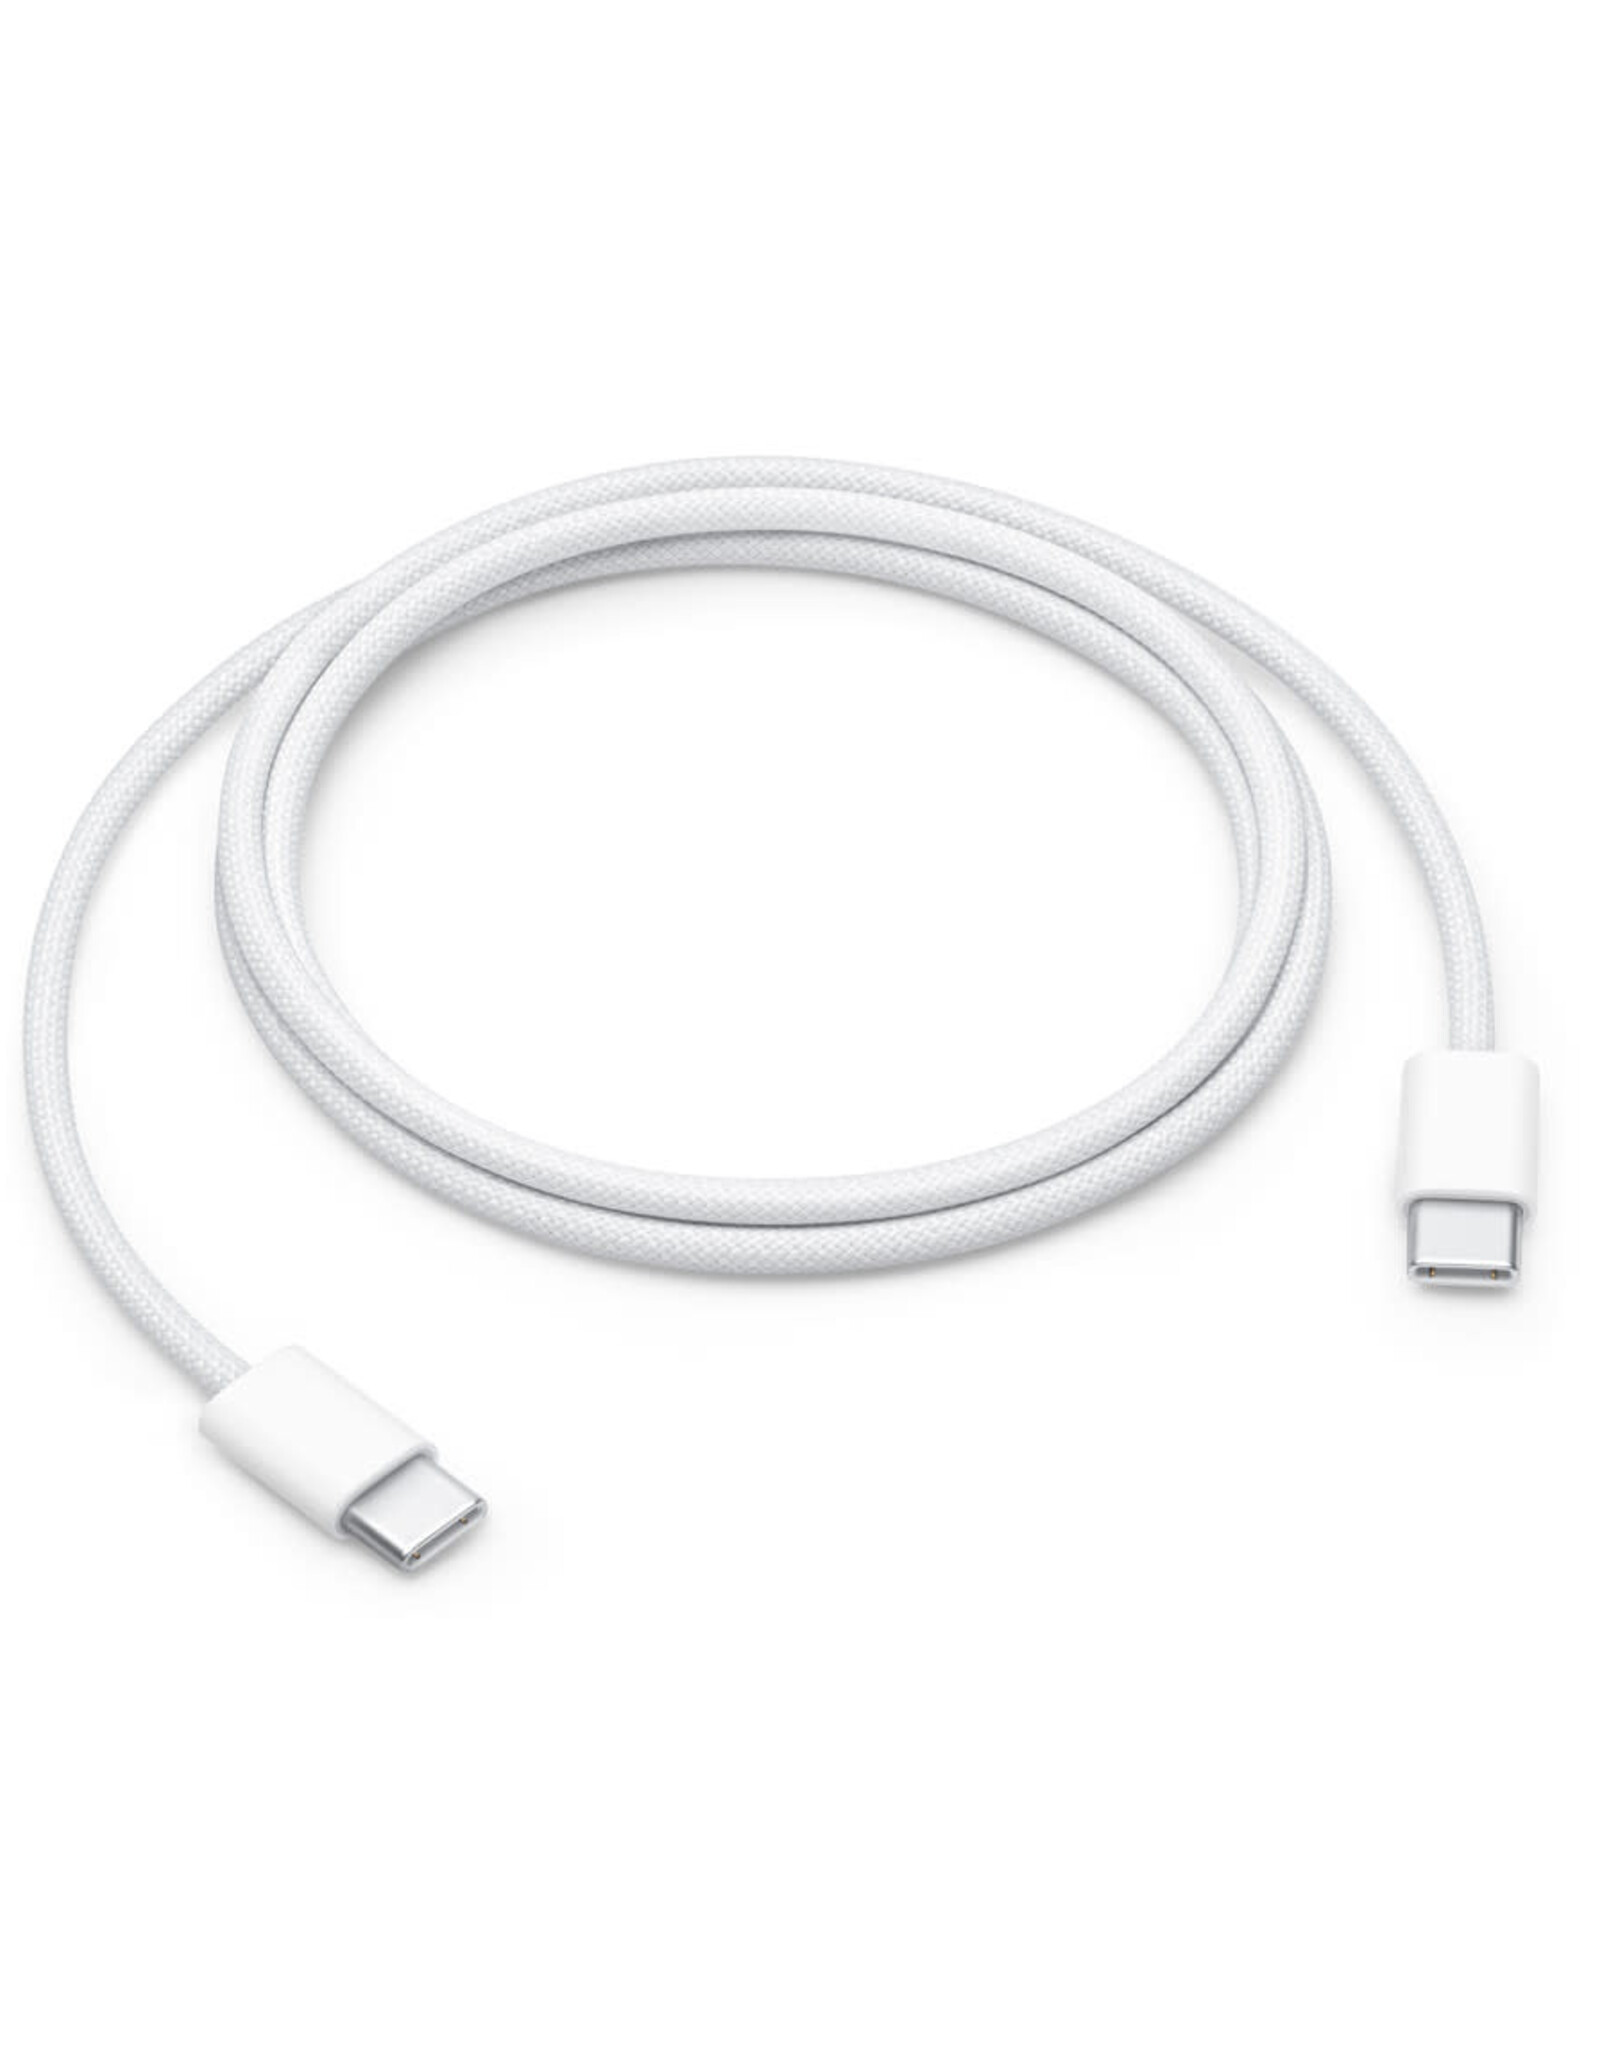 Apple USB C 60W Charge Cable (1m)